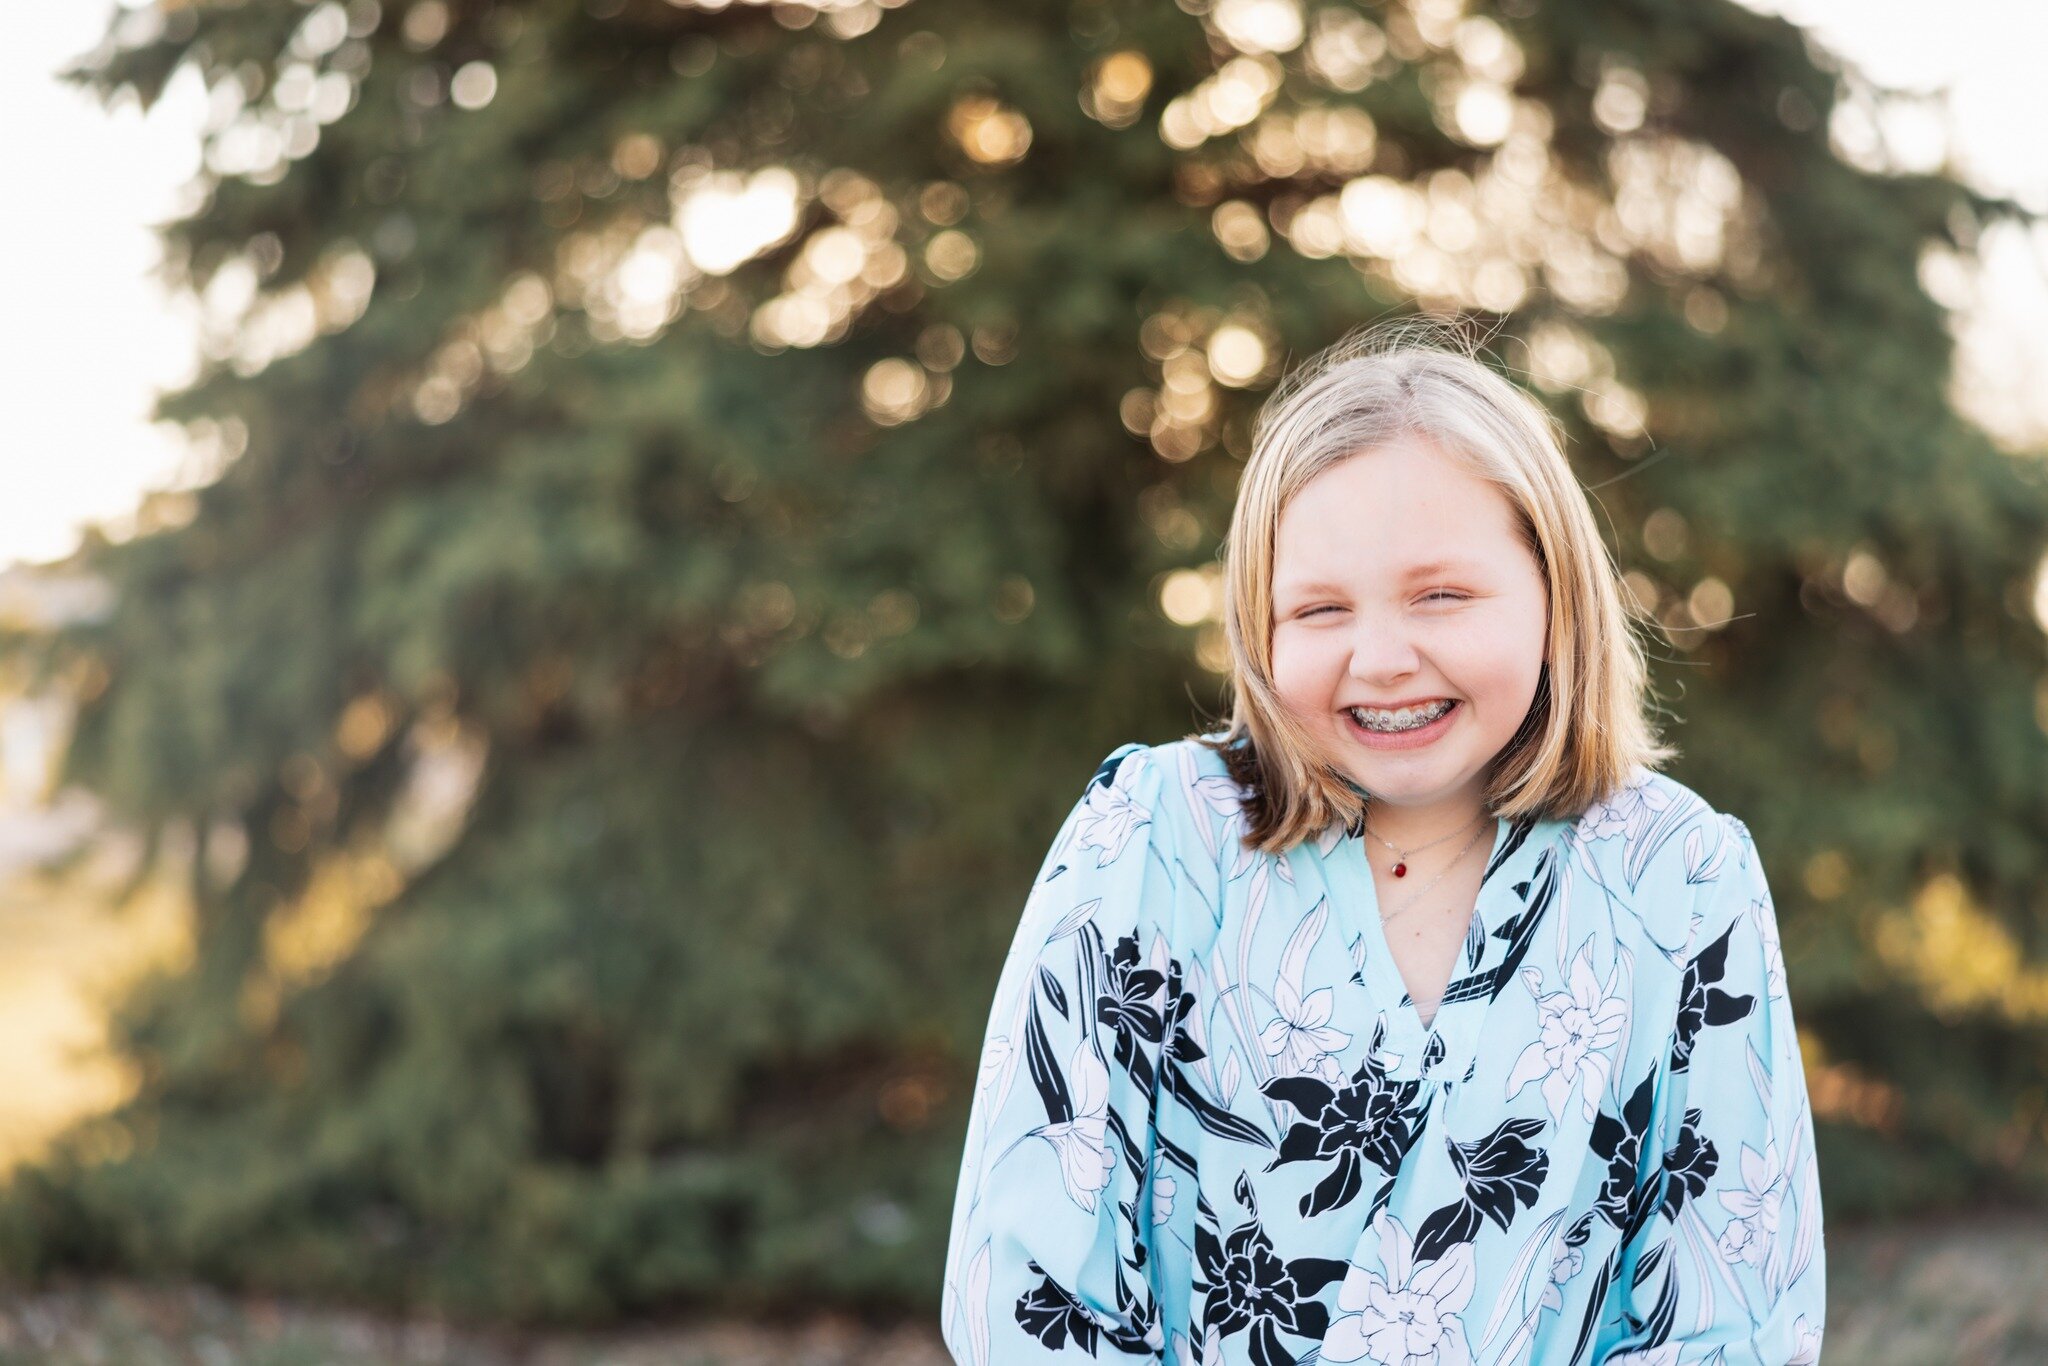 The sun was ✨glowing ✨ for Miss Isla's session last week, which is fitting since this girl brings sunshine wherever she goes! Here are a few of my favorite shots to brighten your day!